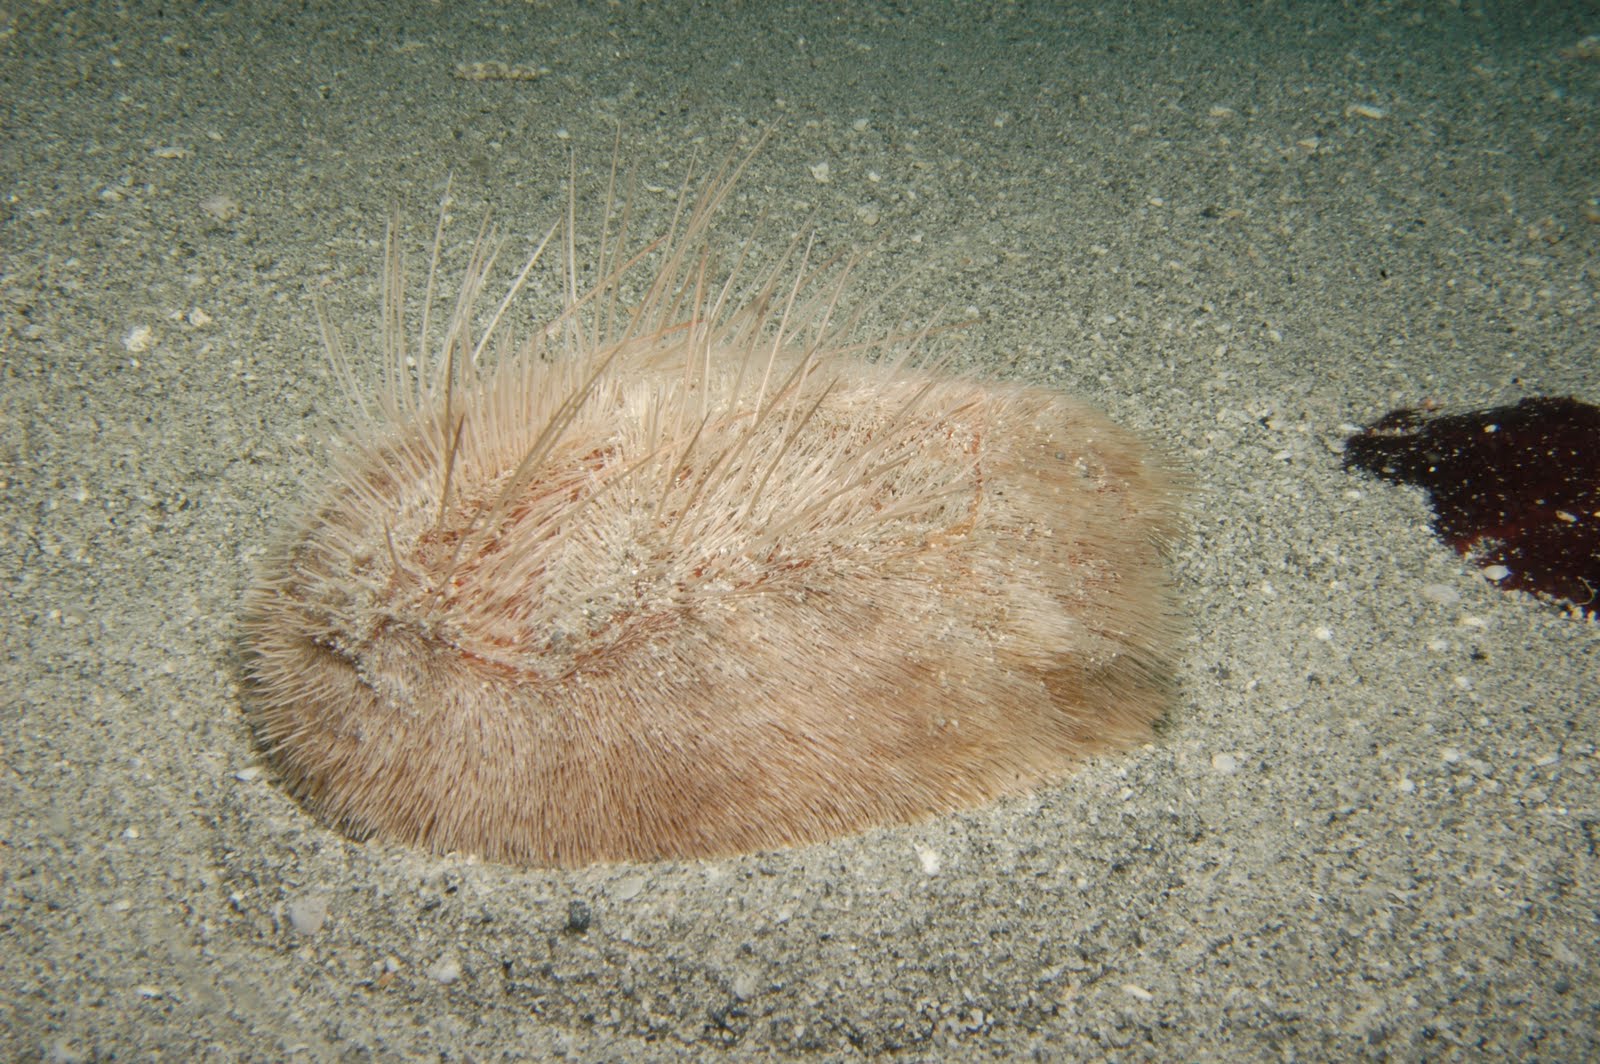 sea biscuit with long spines half buried in sand